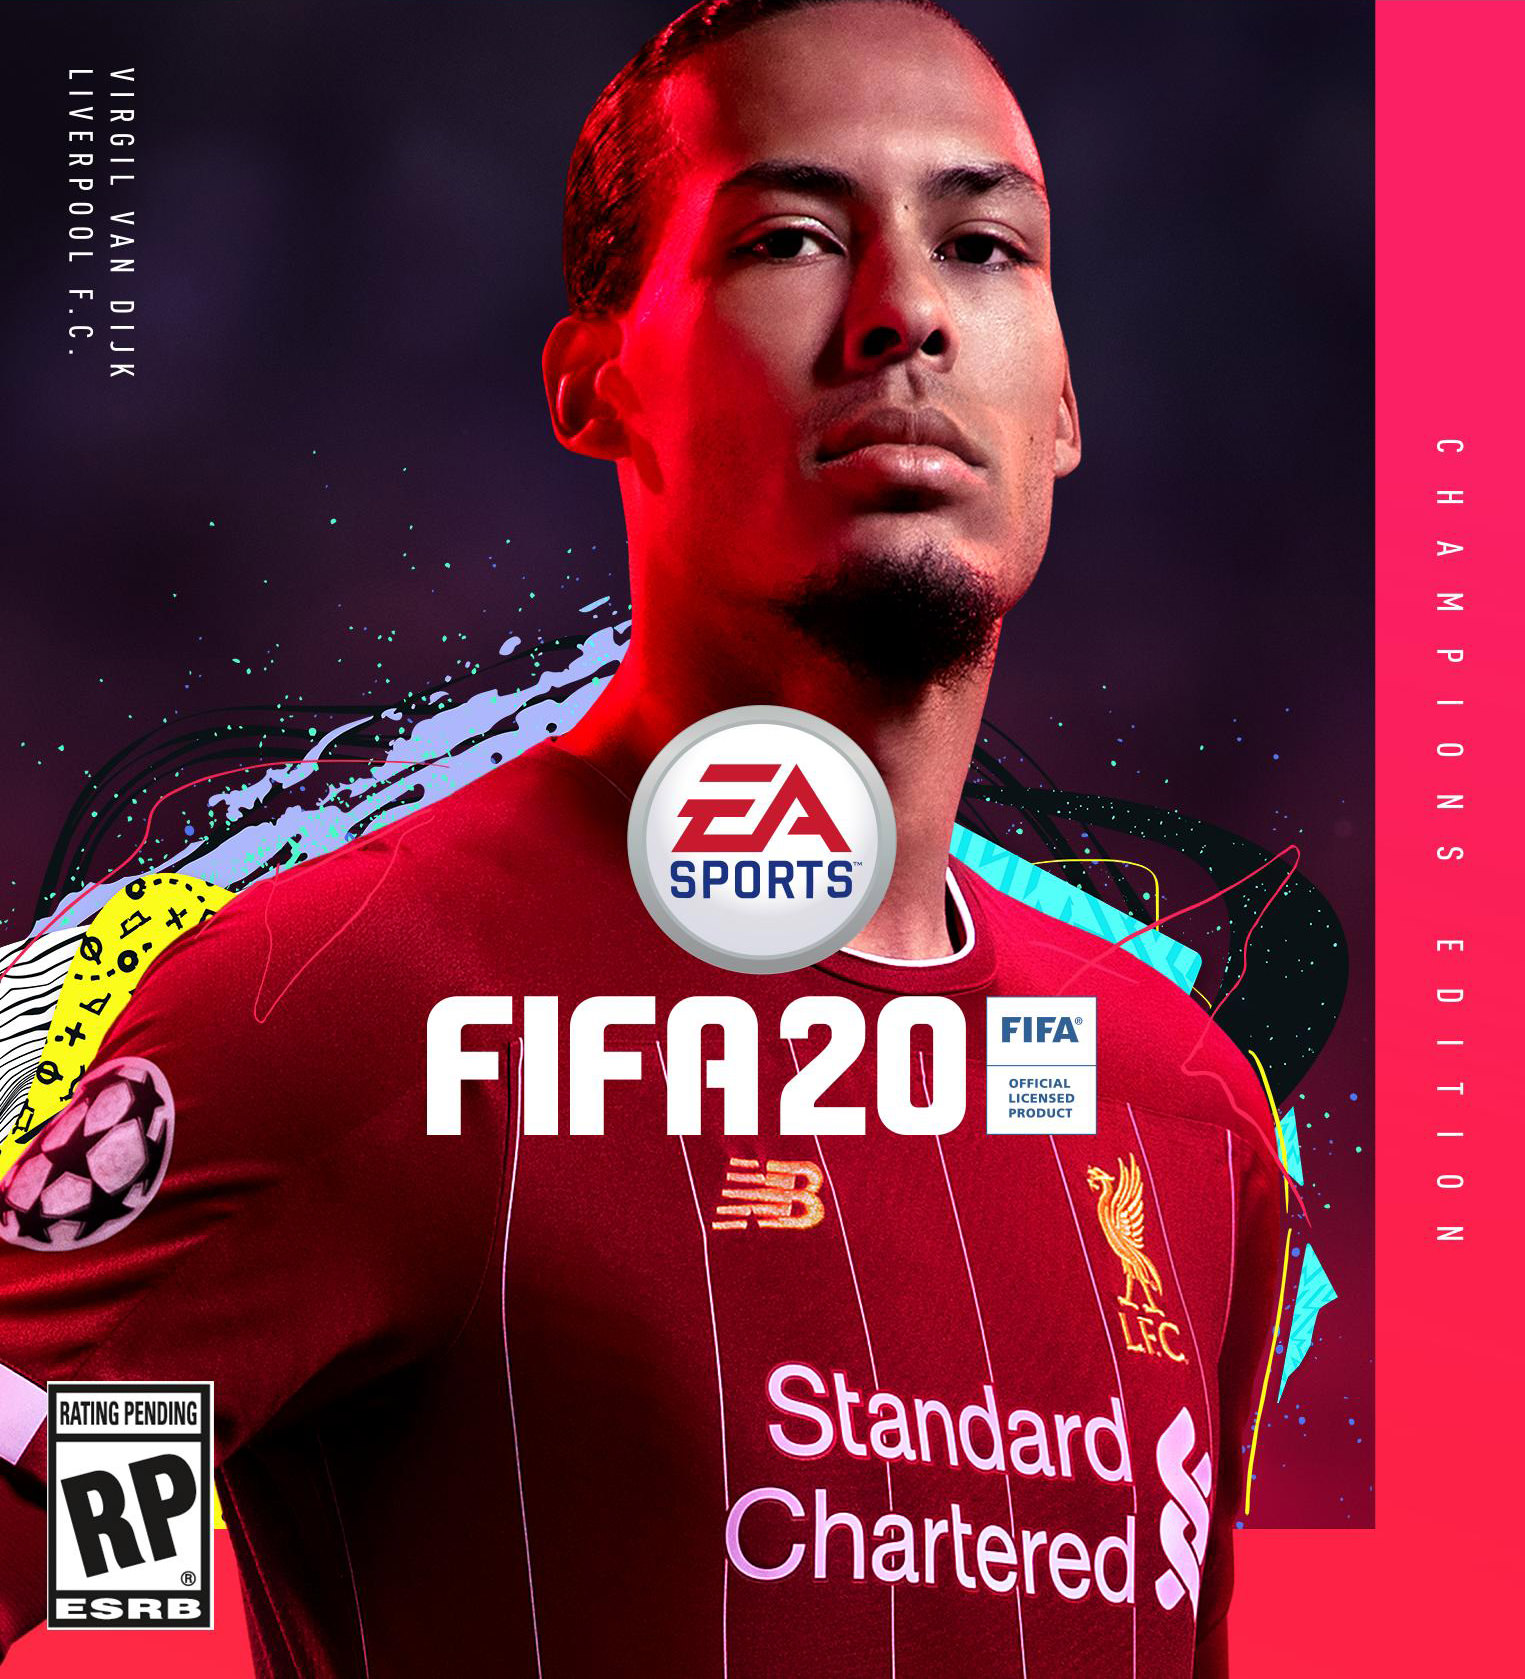 FIFA 20: Everything about this year's new game - Demo release, Ultimate